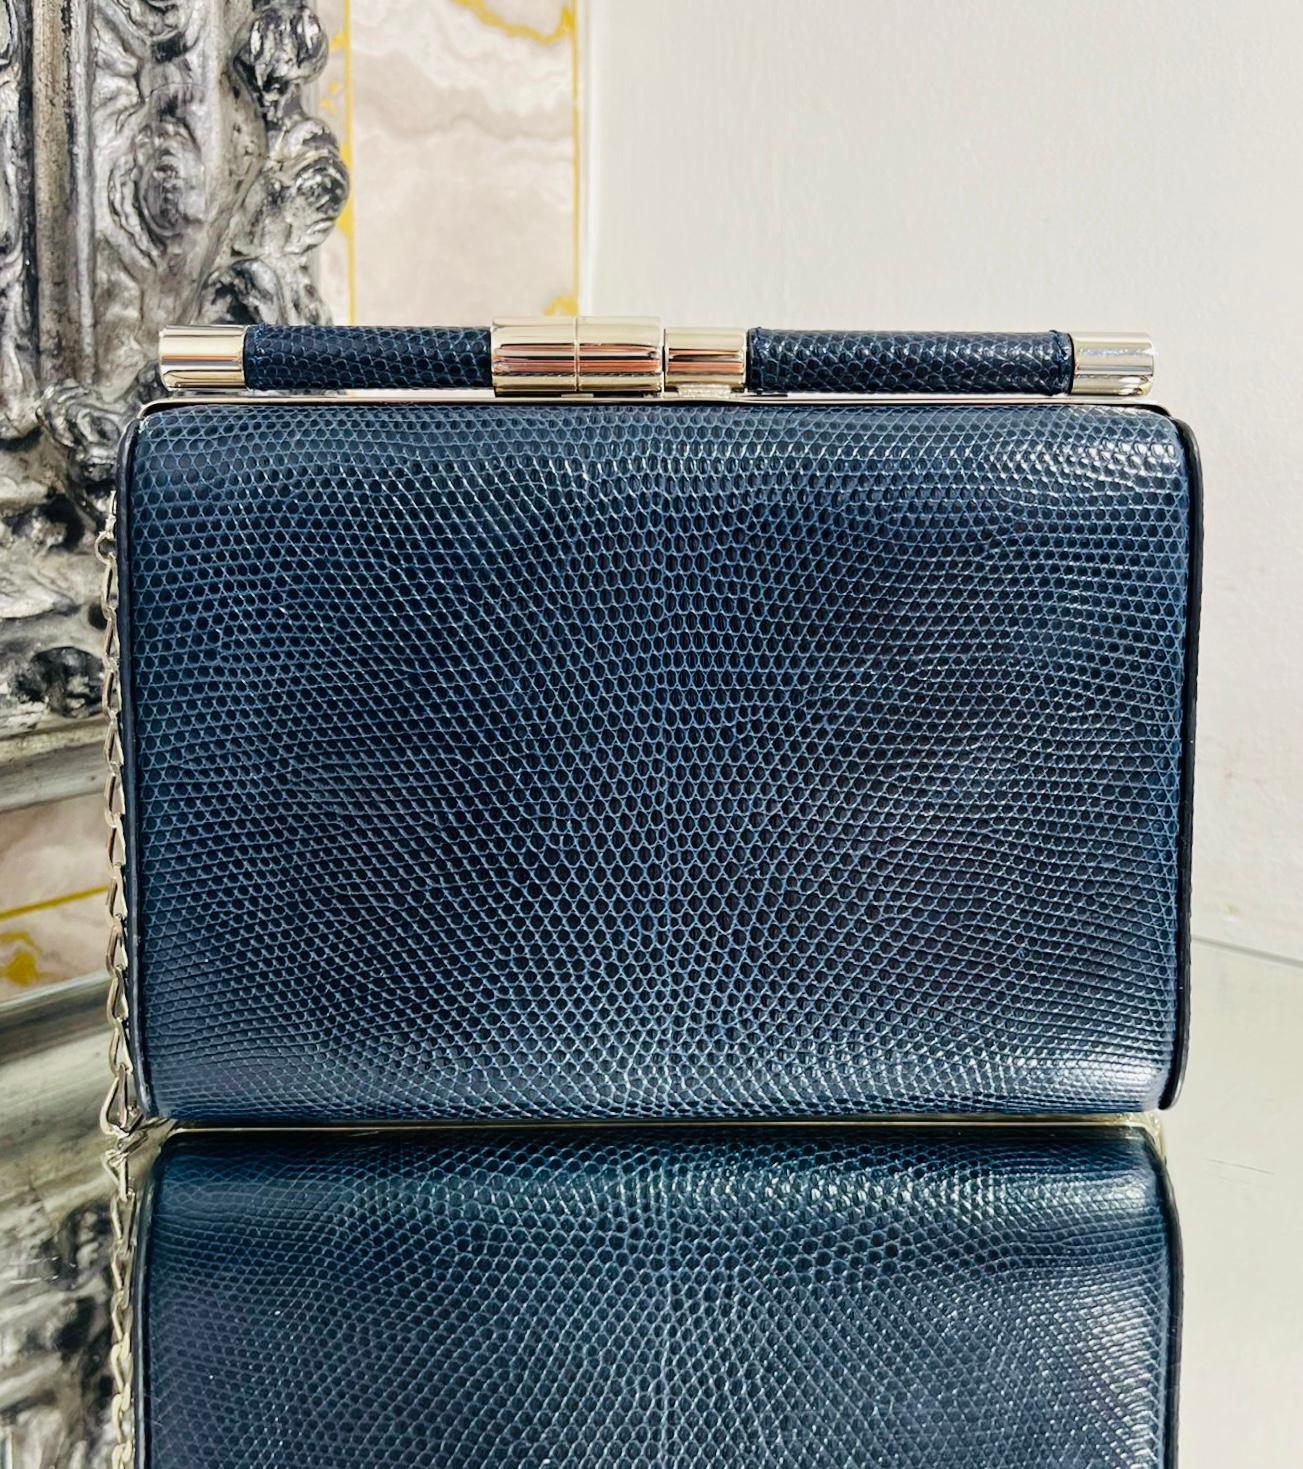 Tyler Ellis Lizard Skin Clutch Bag With Chain Strap In Excellent Condition For Sale In London, GB